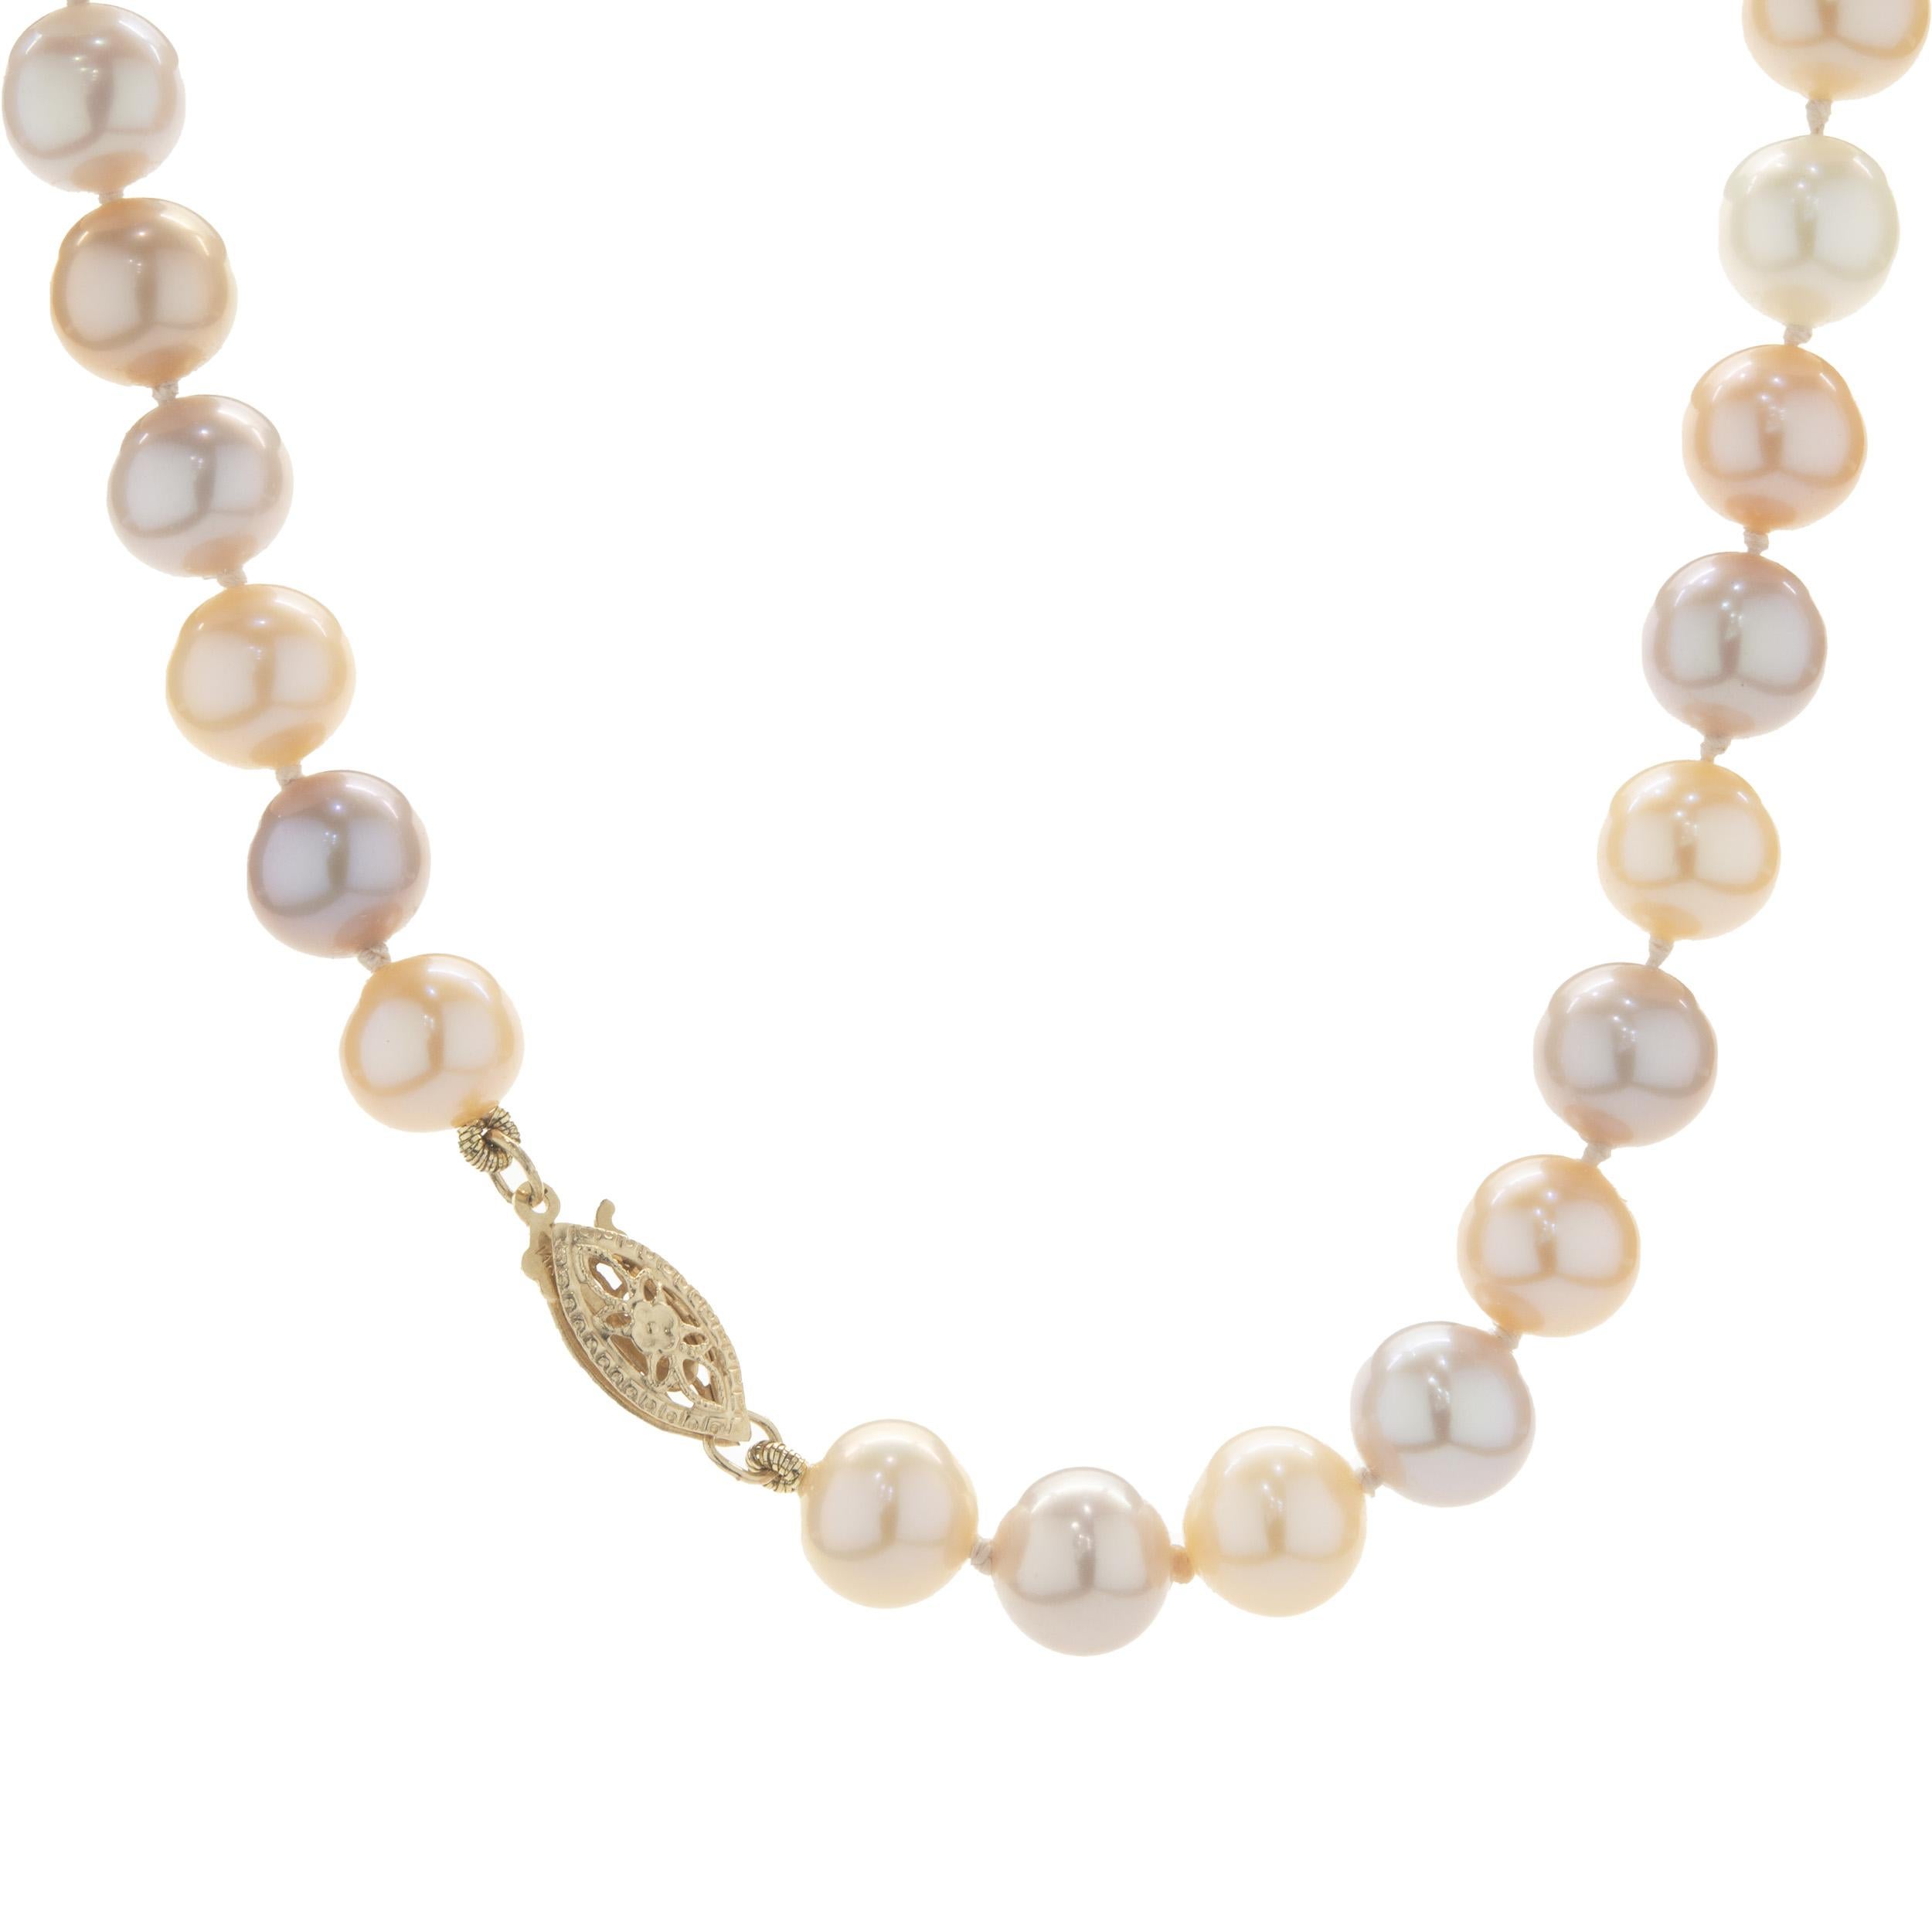 Designer: custom
Material: 14k yellow gold
Weight: 34.48 grams
Dimensions: necklace measures 16-inches
